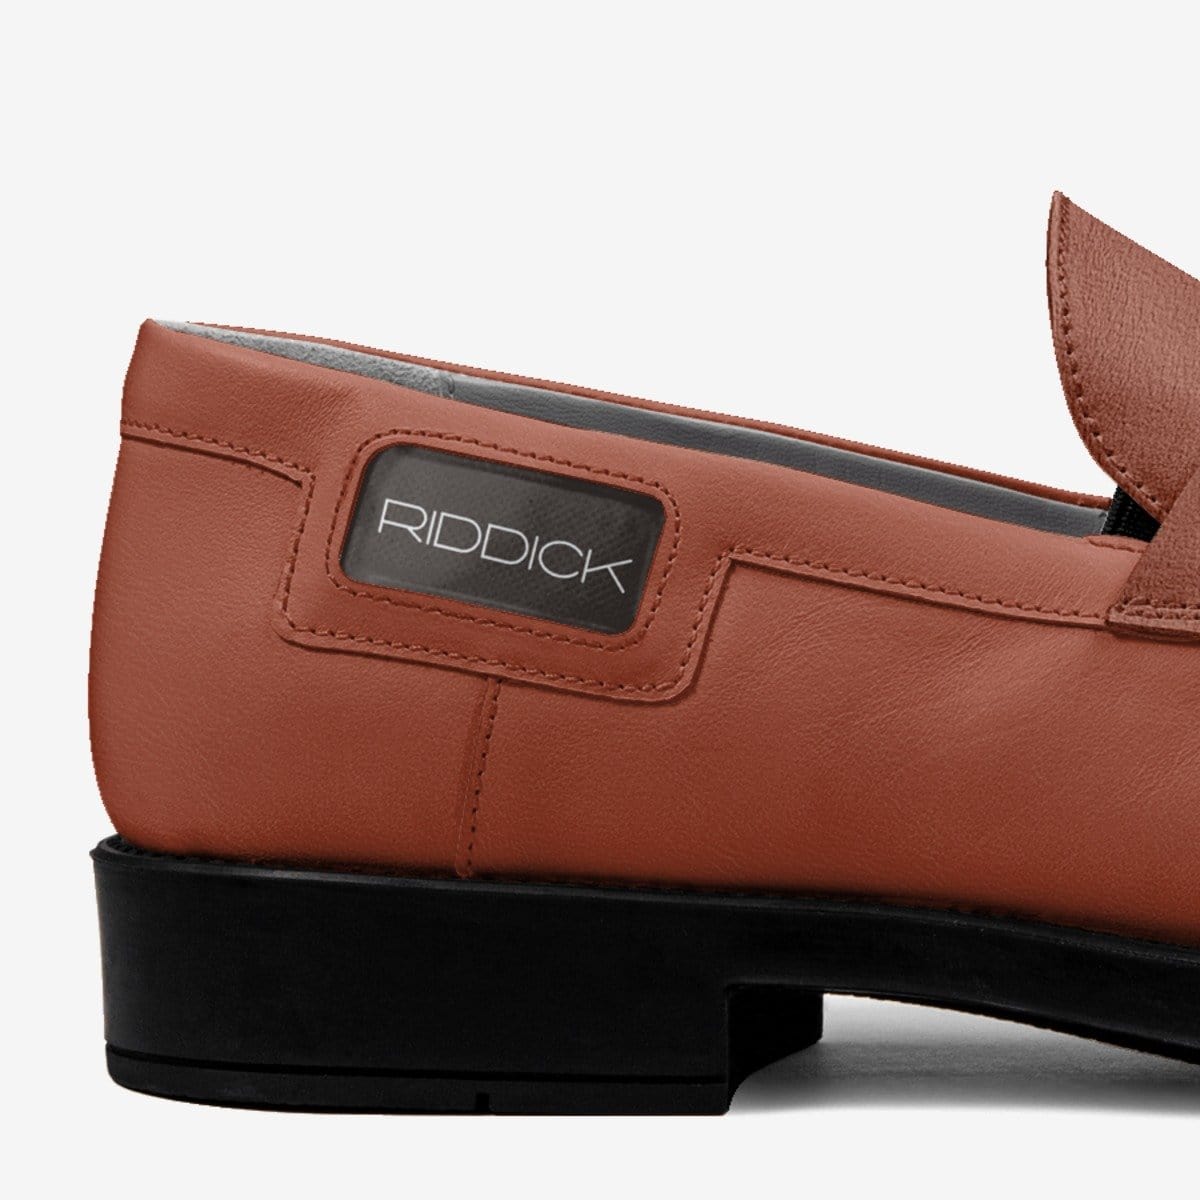 EXEC, THE TASSEL (IN ROASTED PEANUT) - Riddick Shoes Shoe Riddick Shoes   